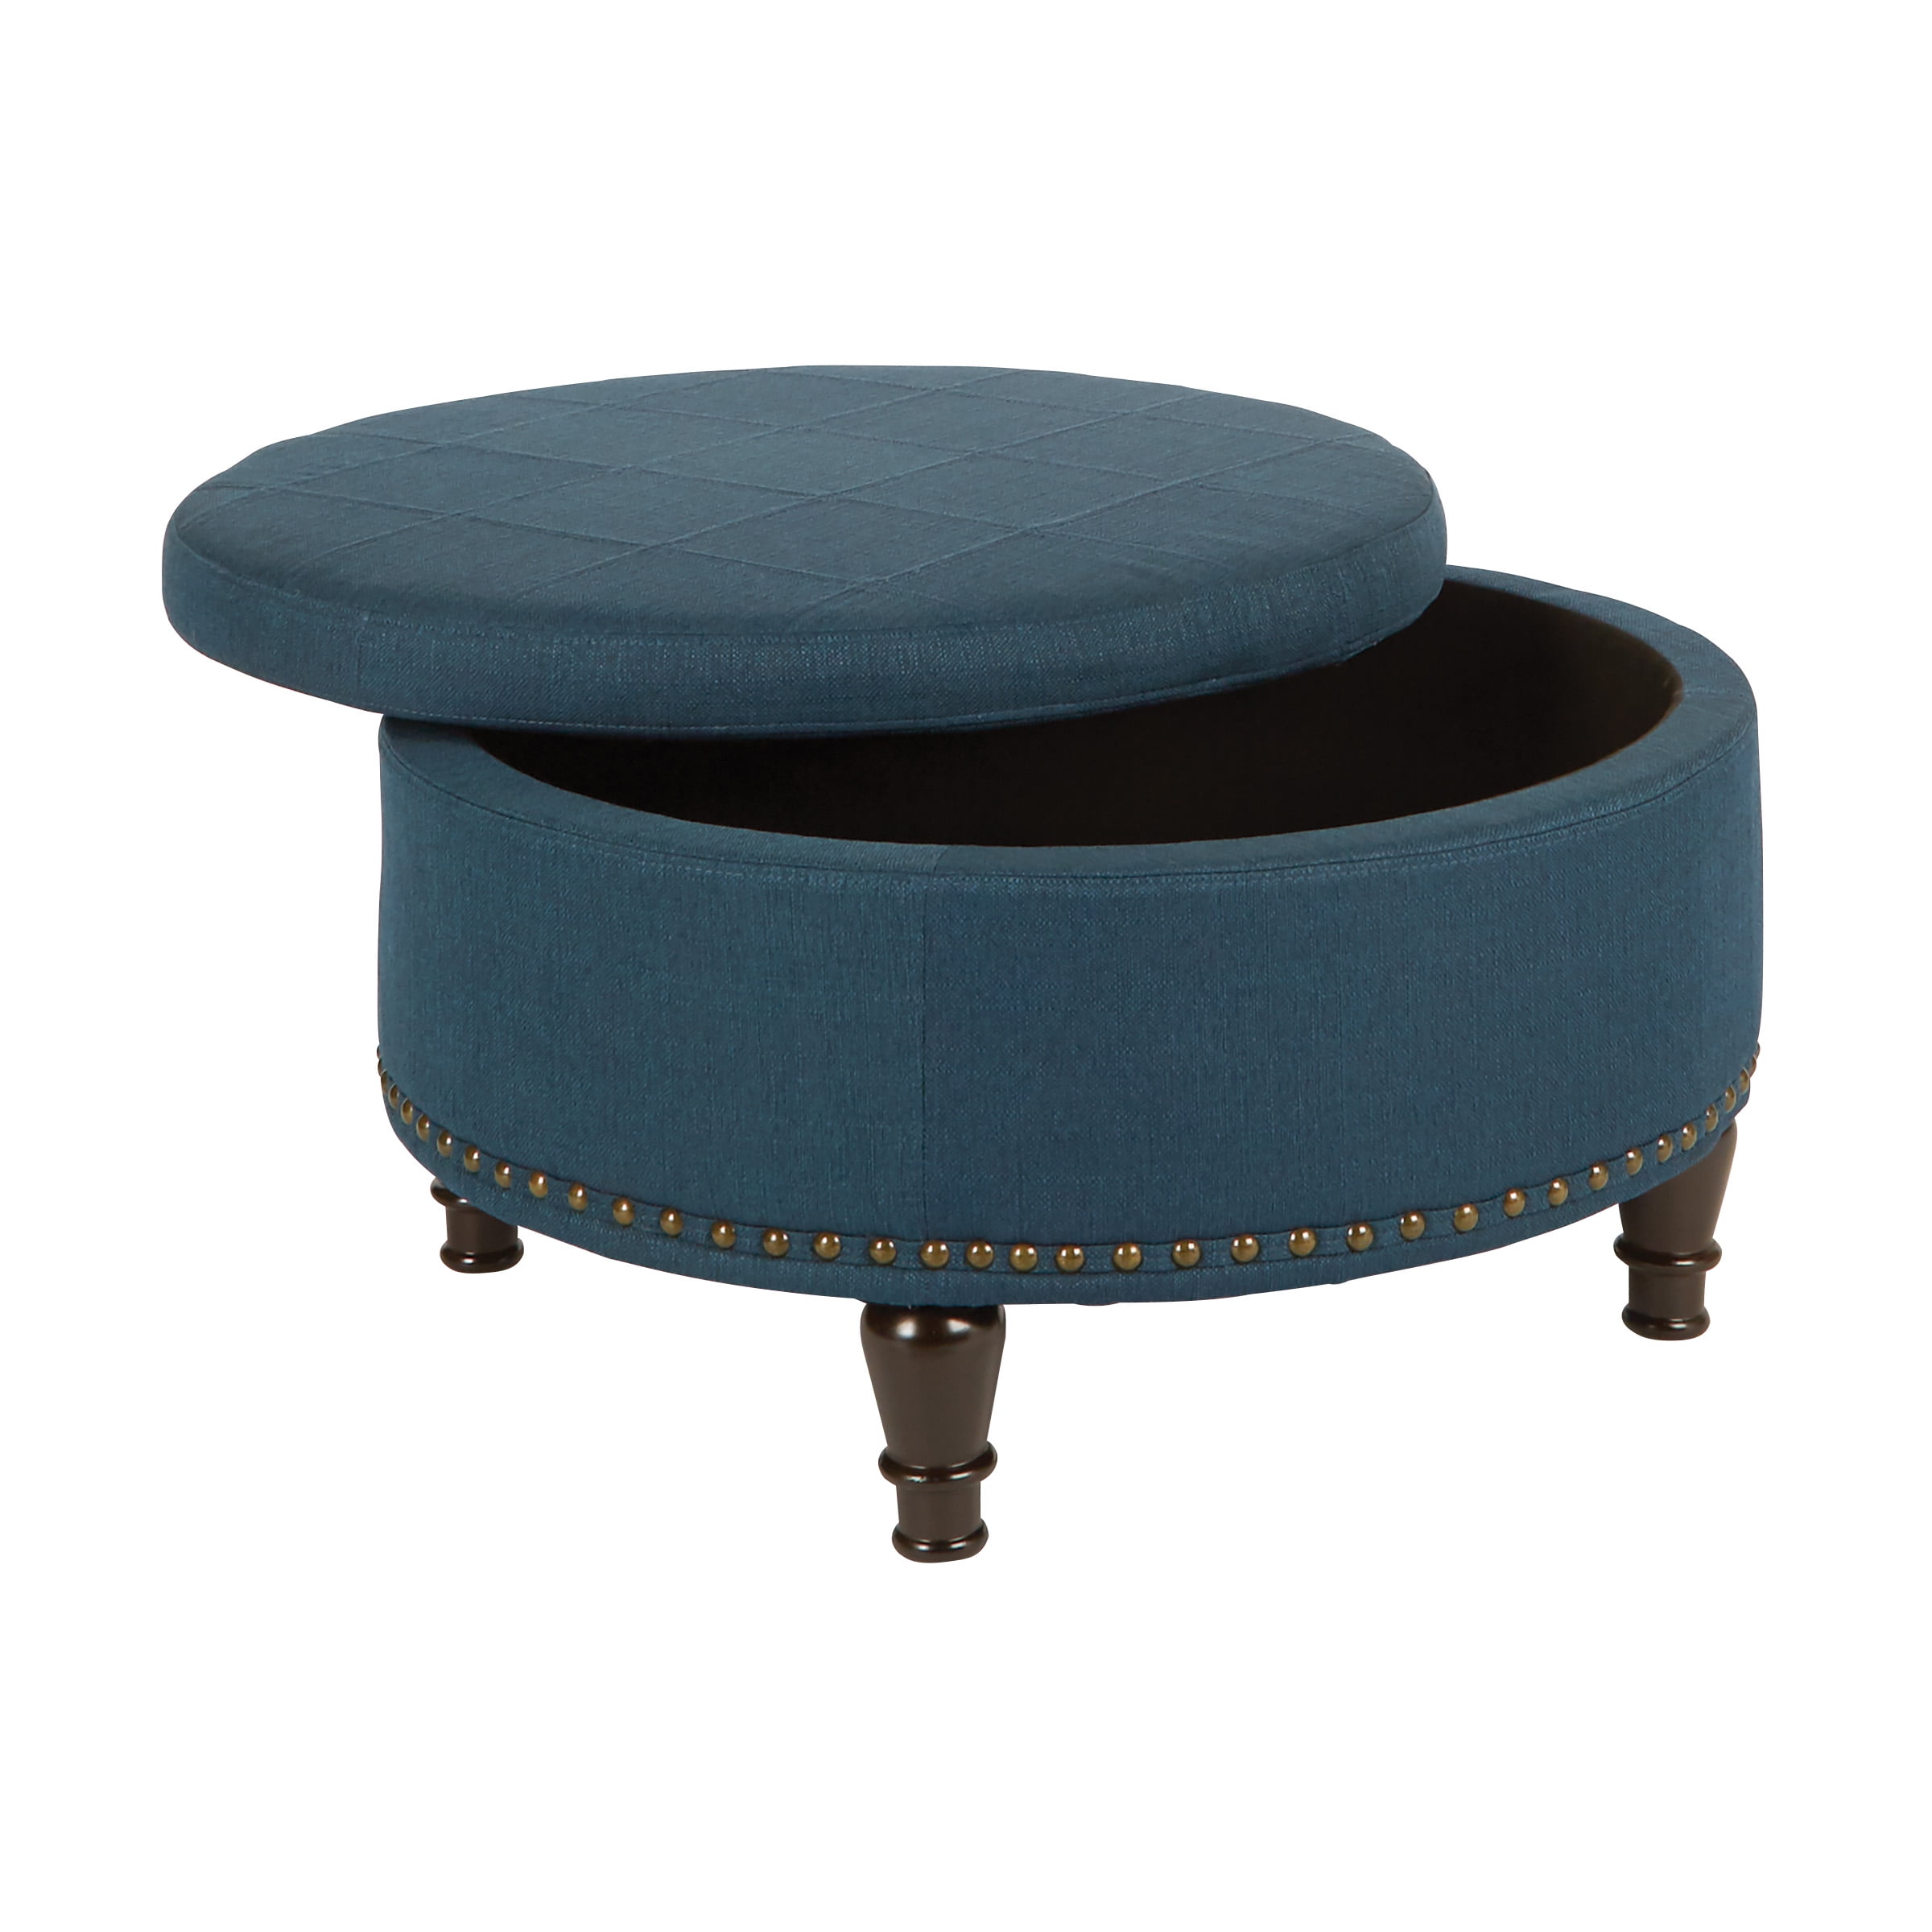 Wooden Footstool With Round Legs Fabric Cover Decoration Material Crafts 26 cm 